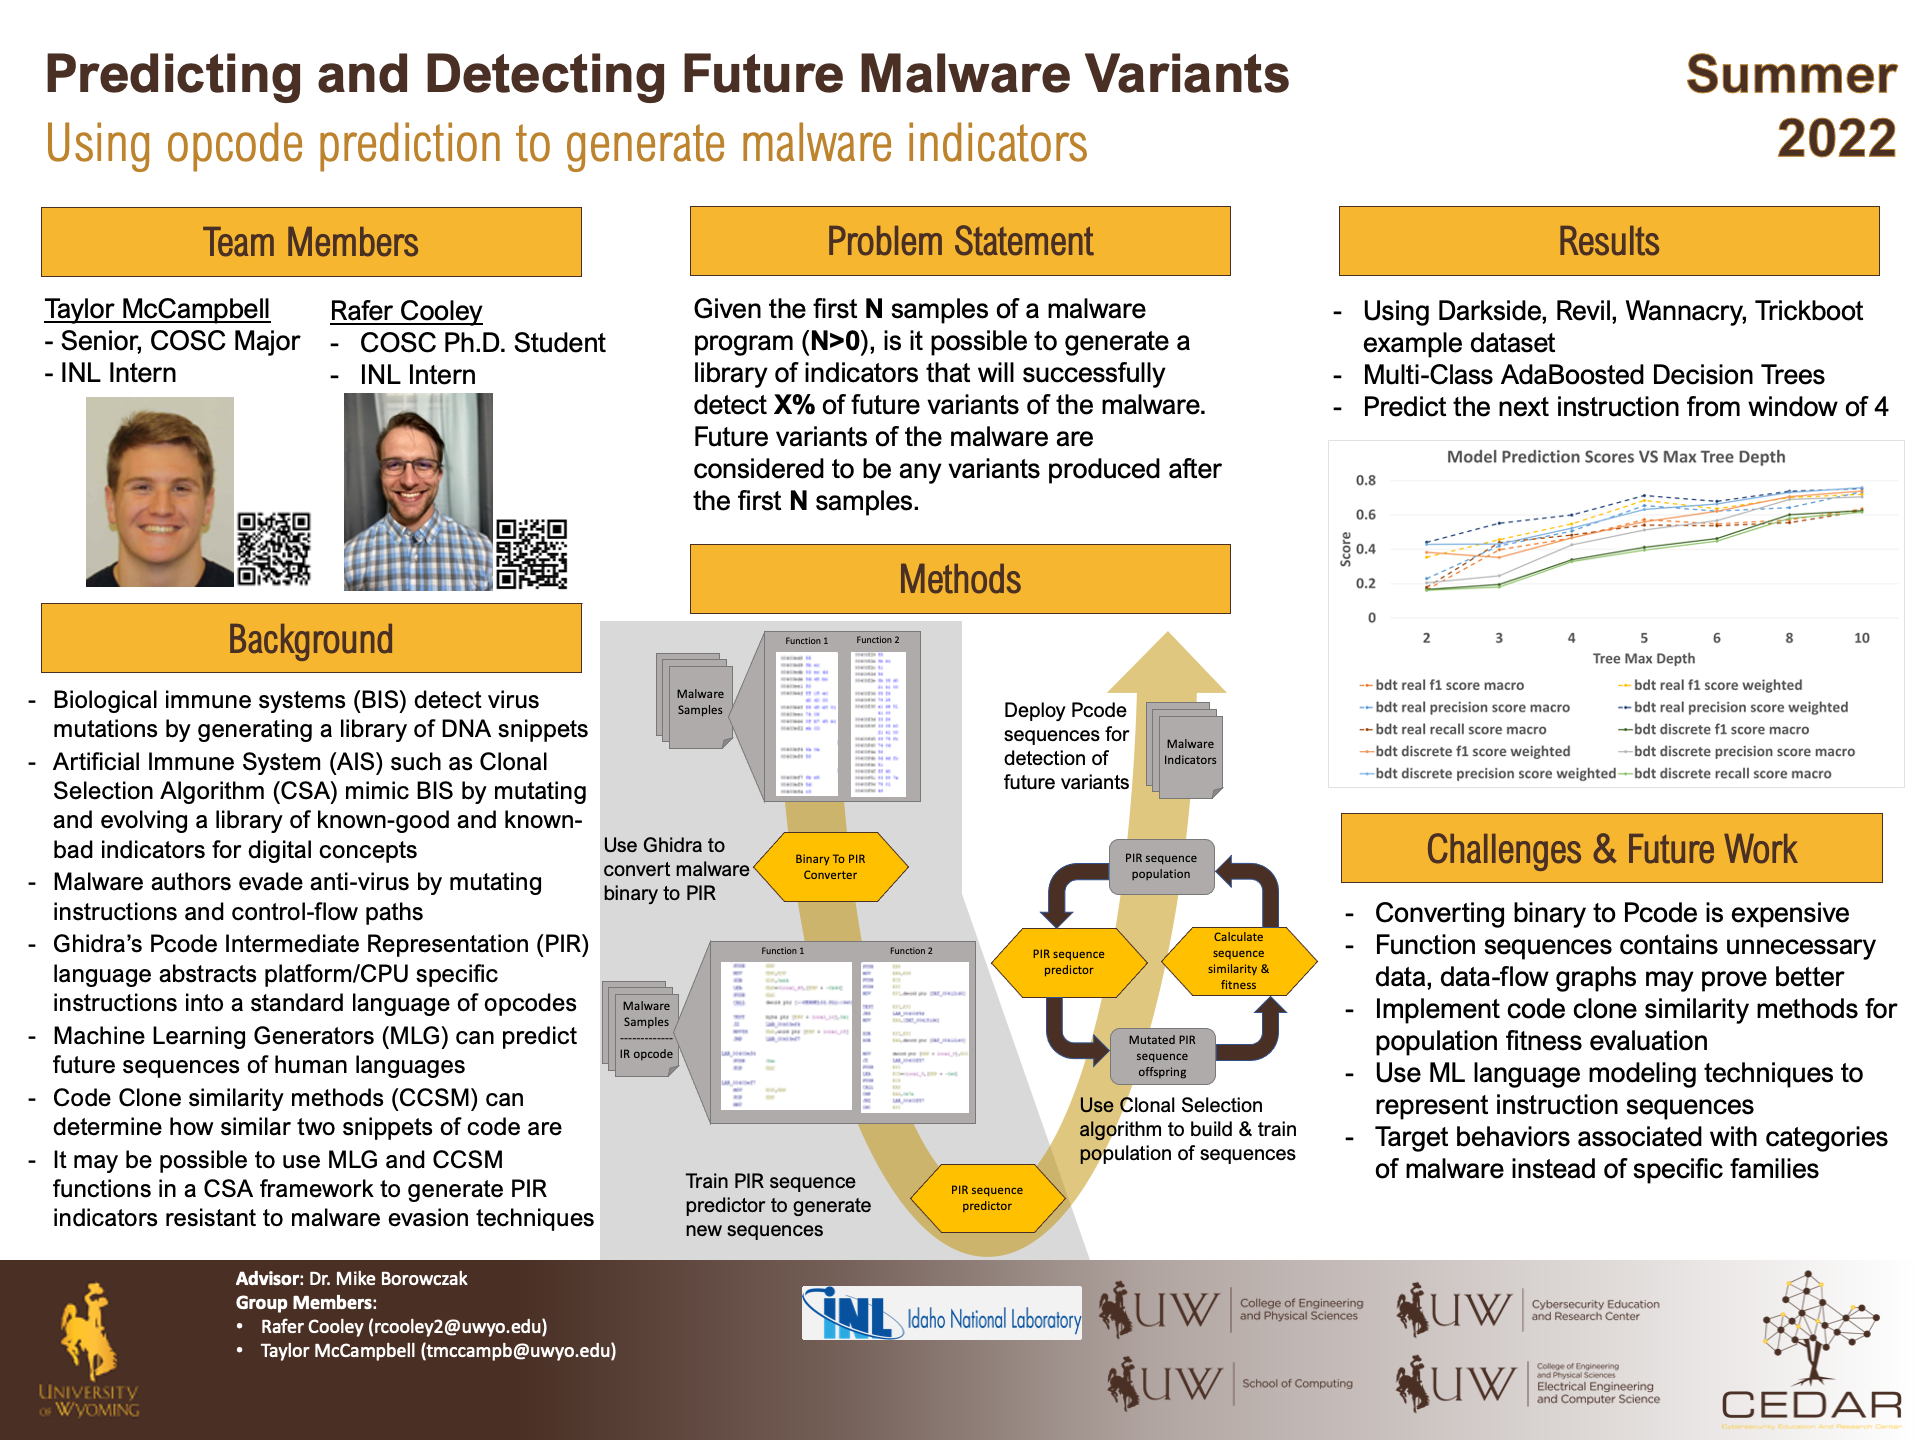  Poster for Predicting and Detecting Future Malware Variants